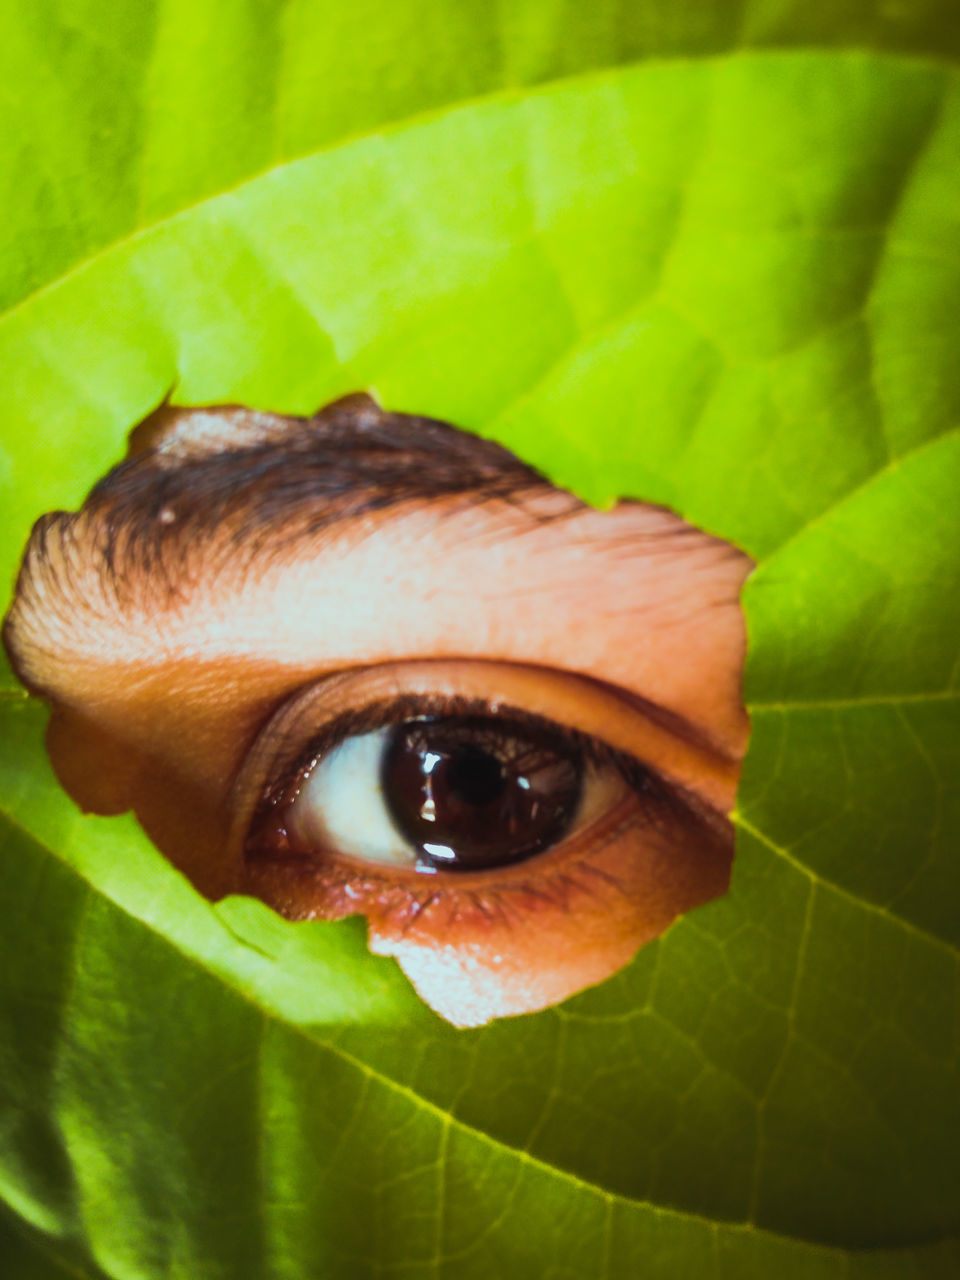 CLOSE-UP PORTRAIT OF PERSON WITH GREEN LEAF